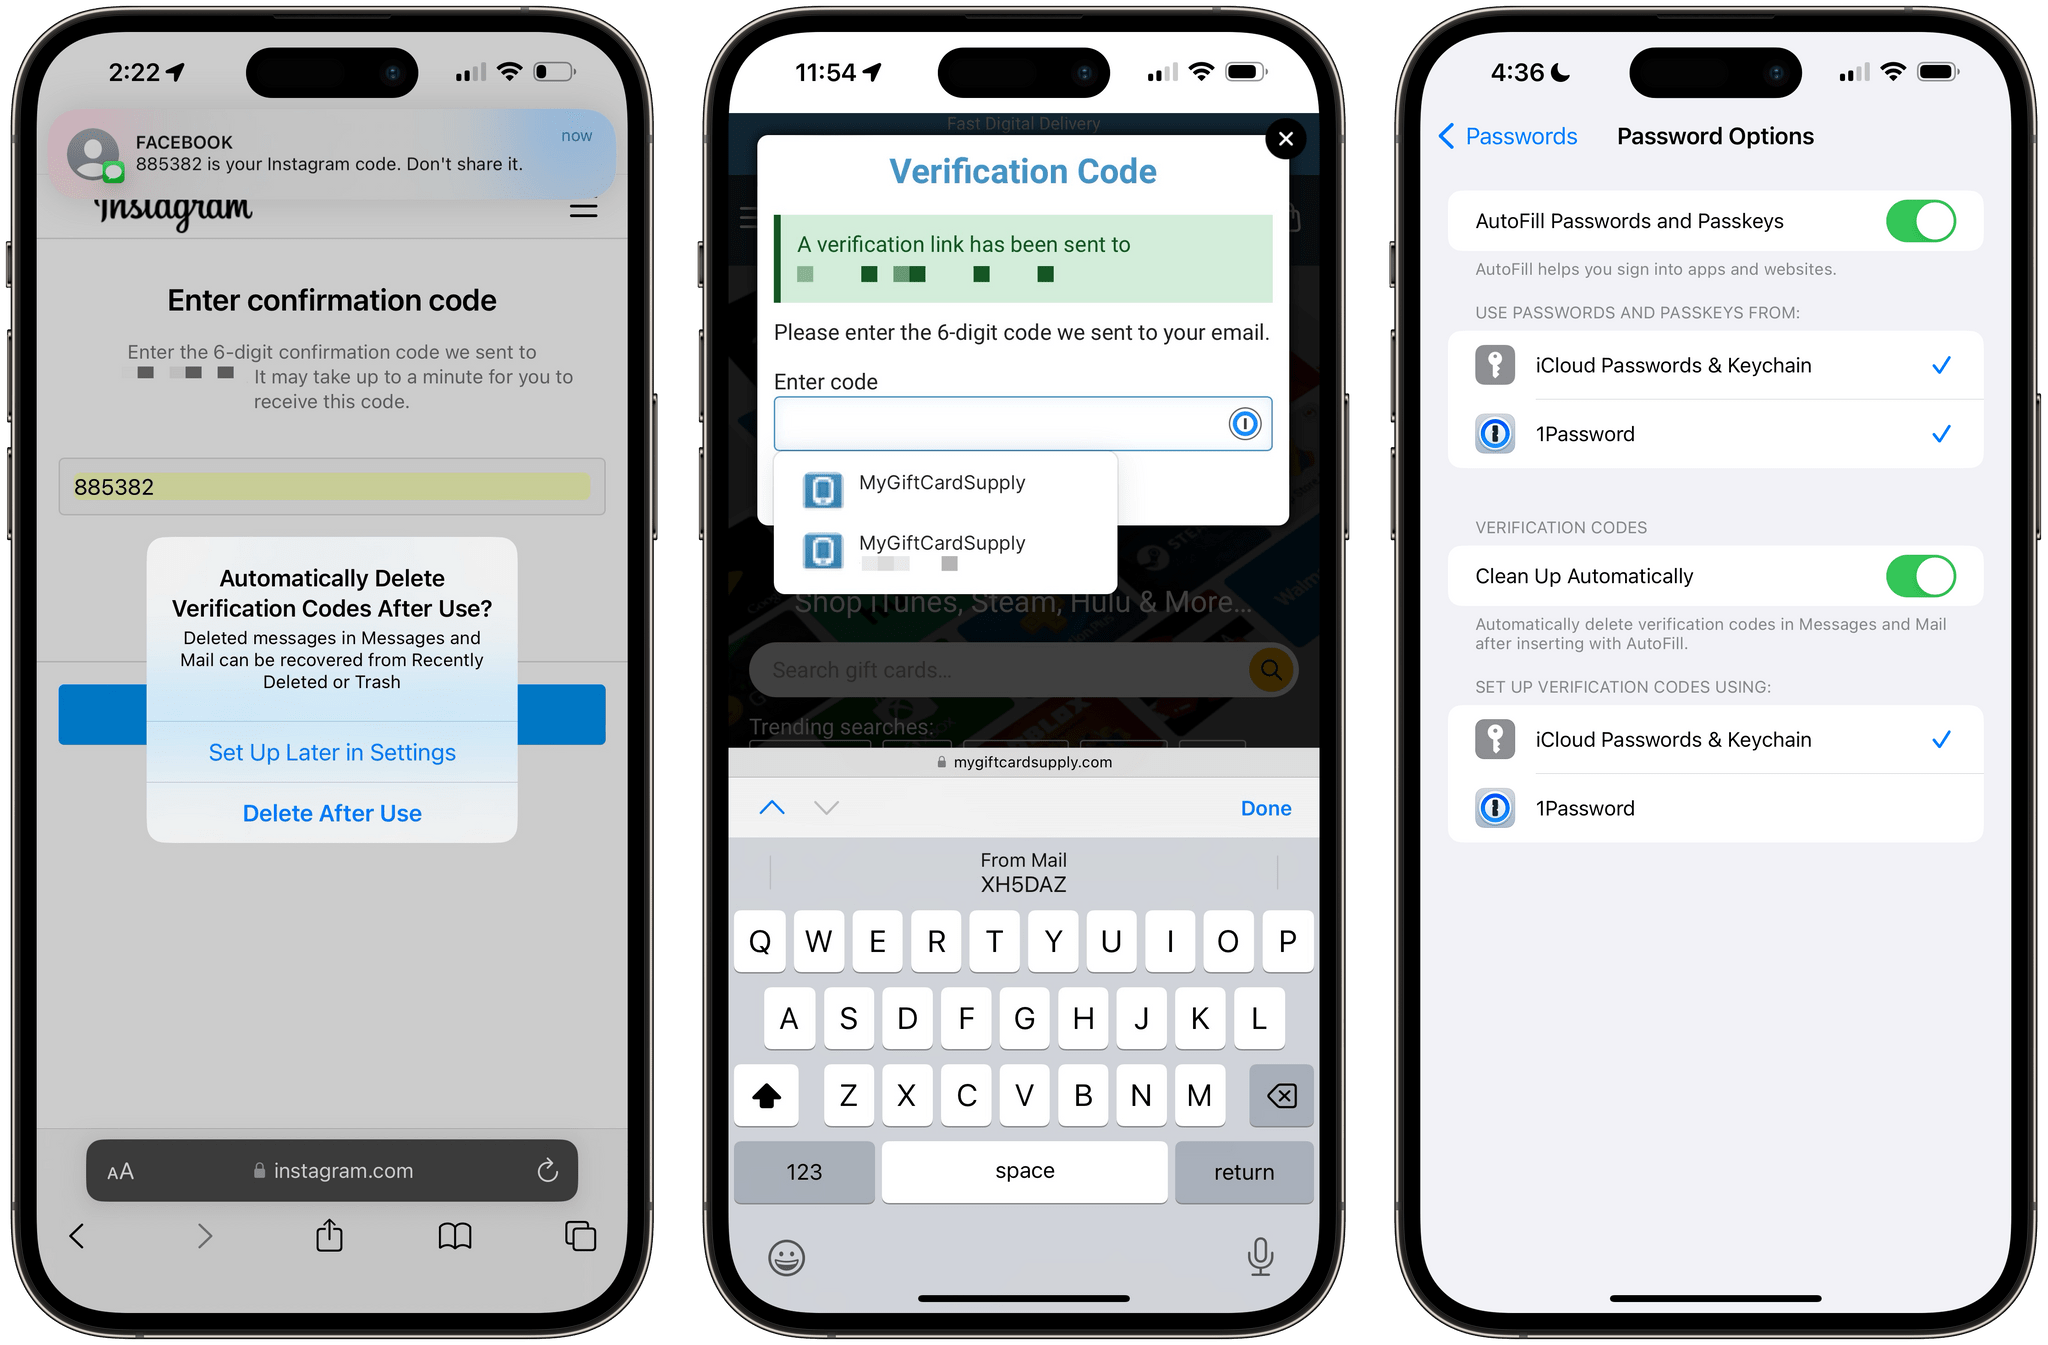 Security code autofill for Messages and Mail. You can now choose to automatically delete these messages after filling, which is an option you can also change in Settings later (right).